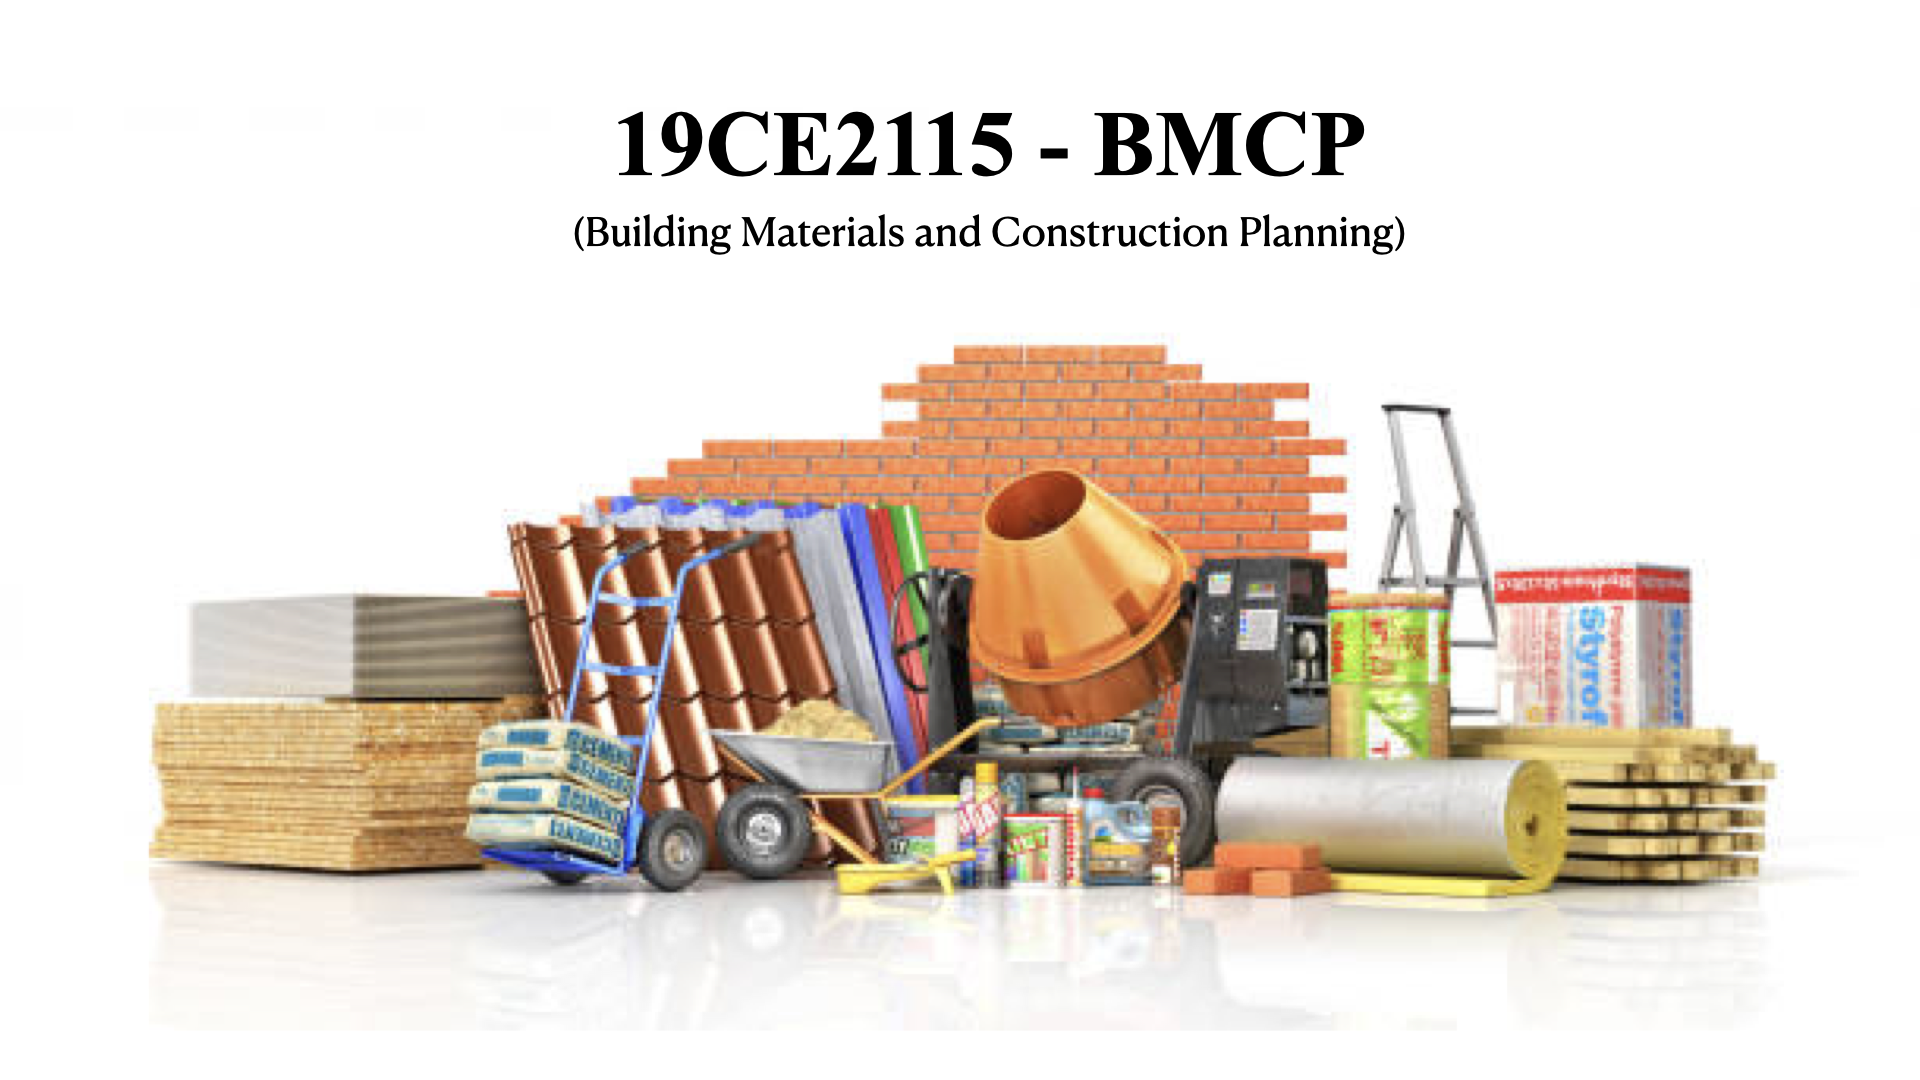 Building Materials and Construction Planning